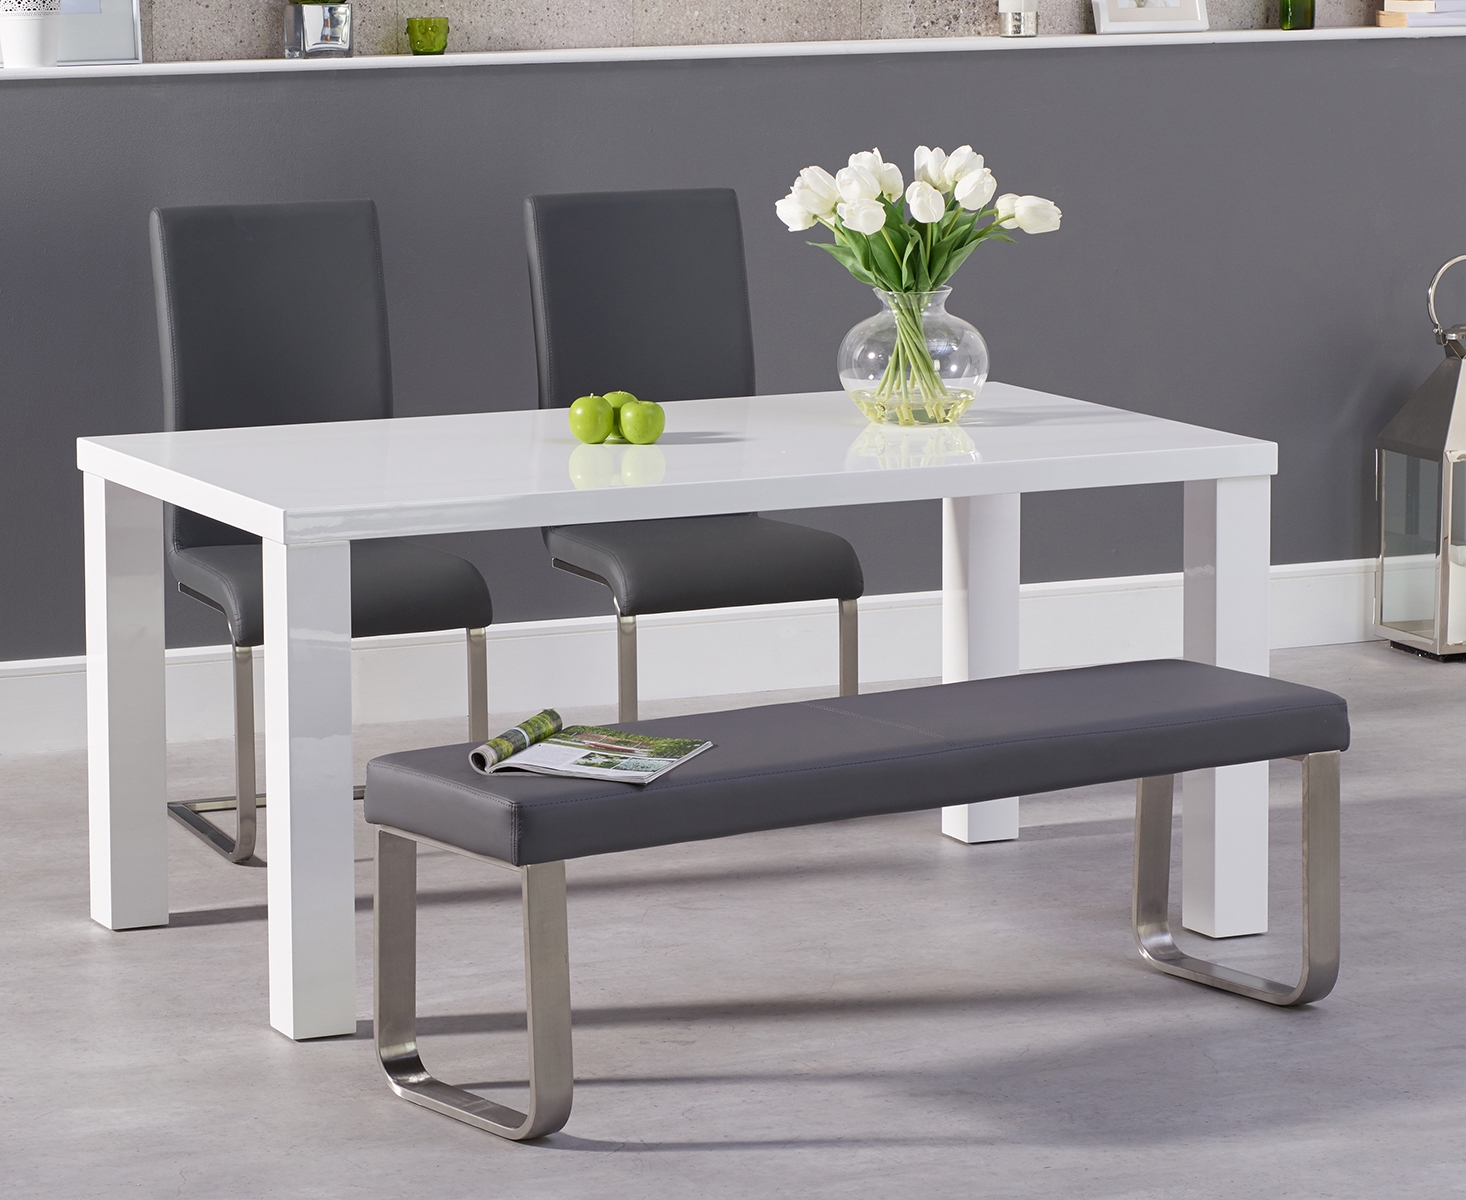 Photo 1 of Atlanta 160cm white high gloss dining table with 4 grey austin chairs with 1 grey bench